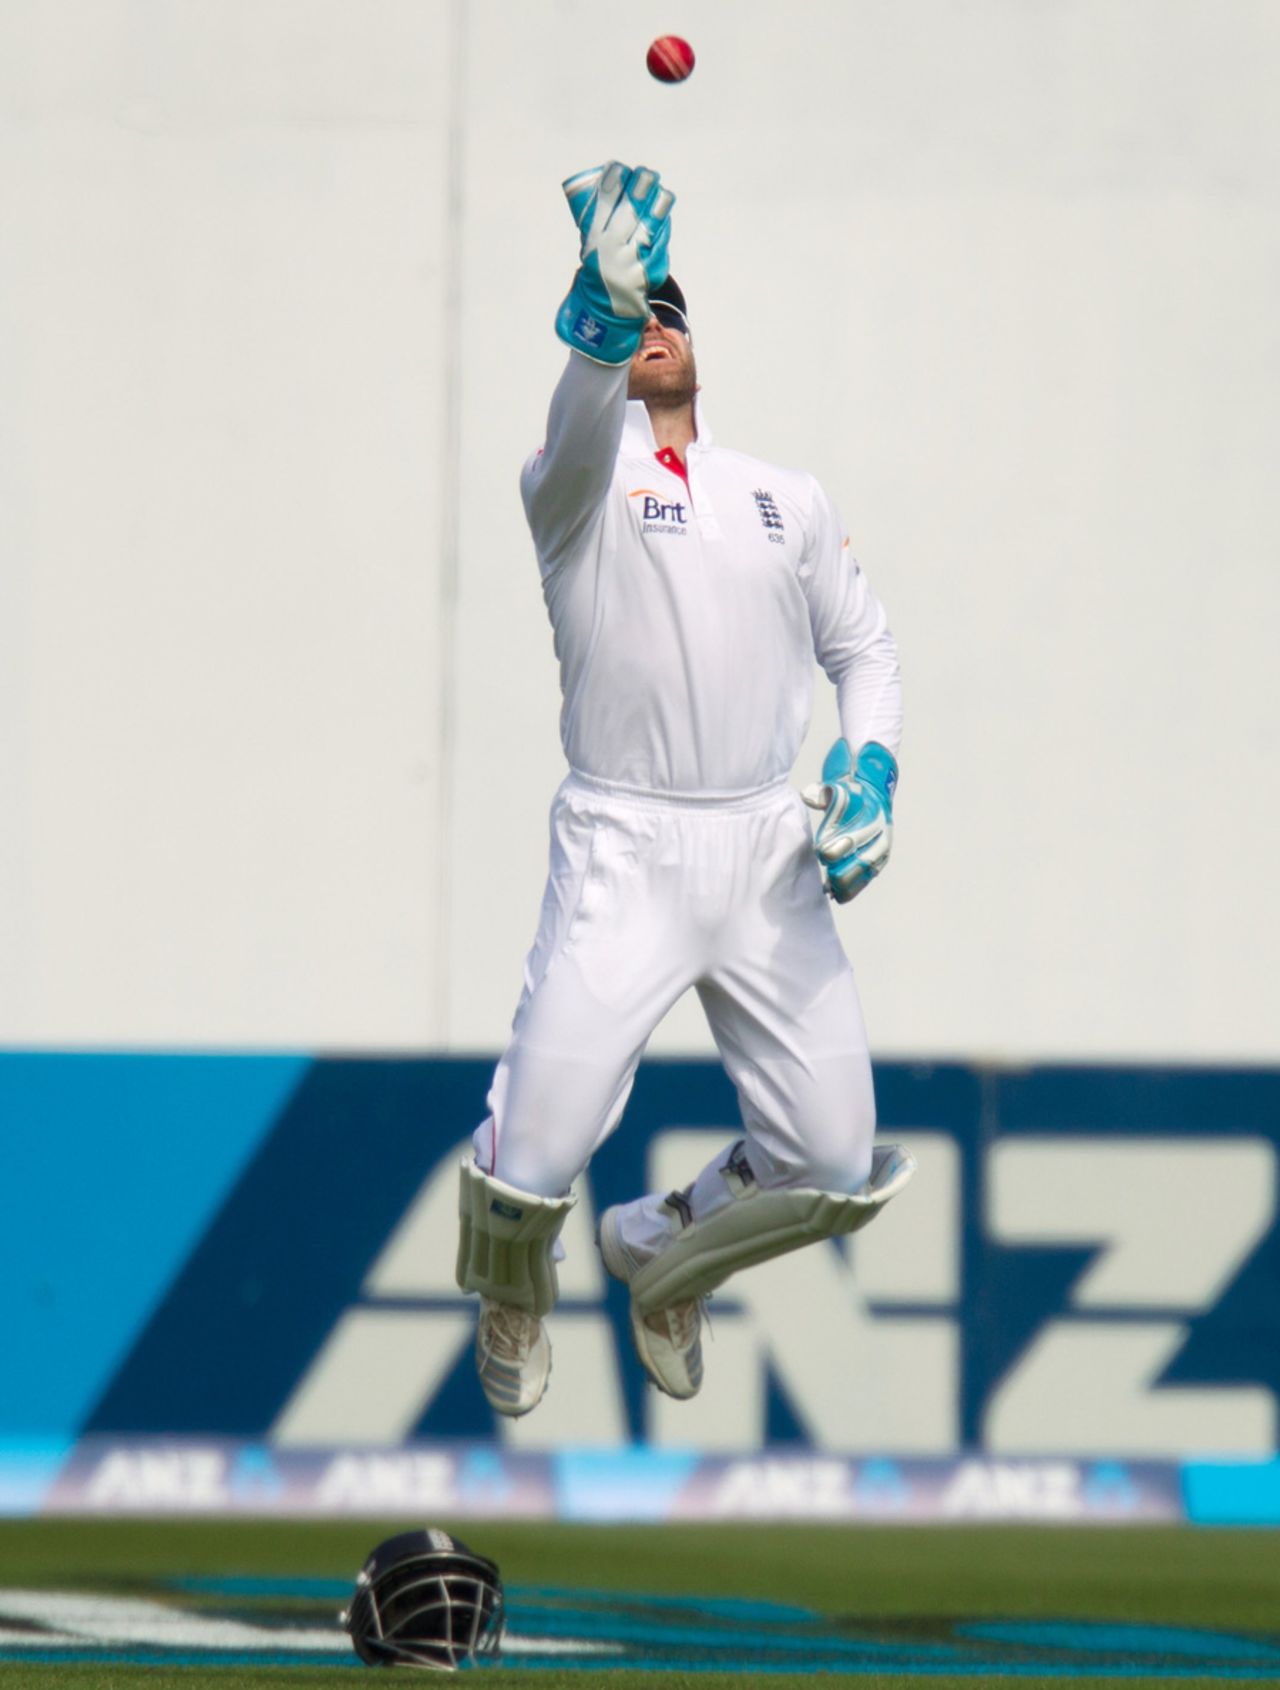 Matt Prior ends the New Zealand innings with the catch of Trent Boult, New Zealand v England, 2nd Test, Wellington, 3rd day, March 16, 2013